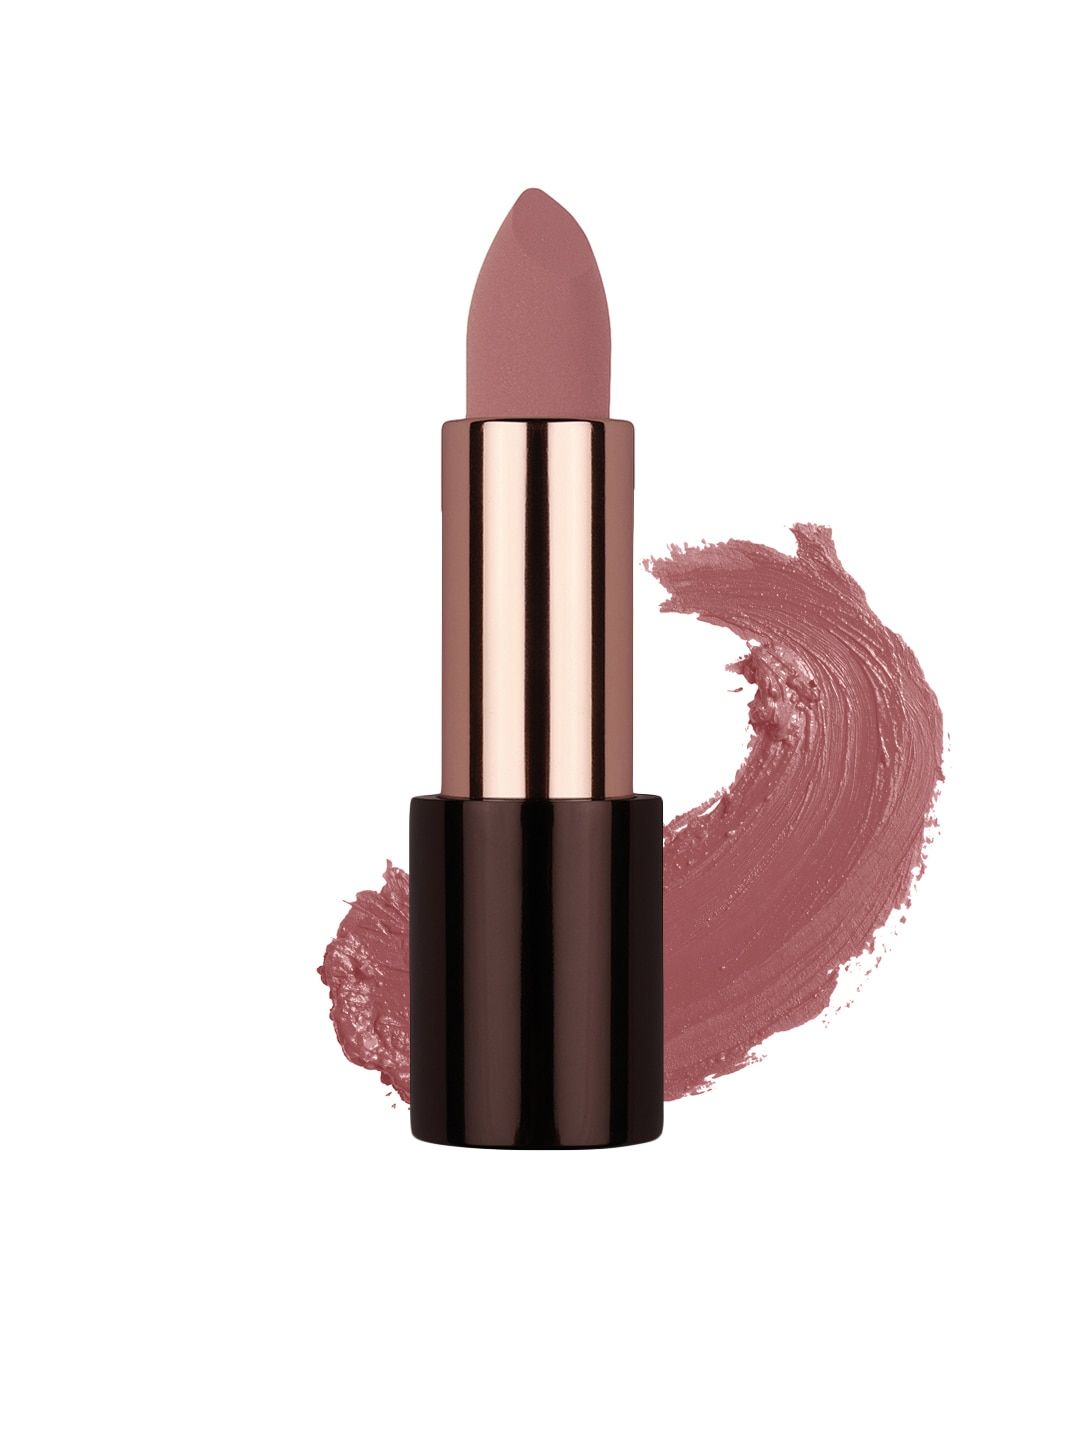 Colorbar Sinful Matte Lipcolor - Do Me Darling 022 3.5gm Price in India